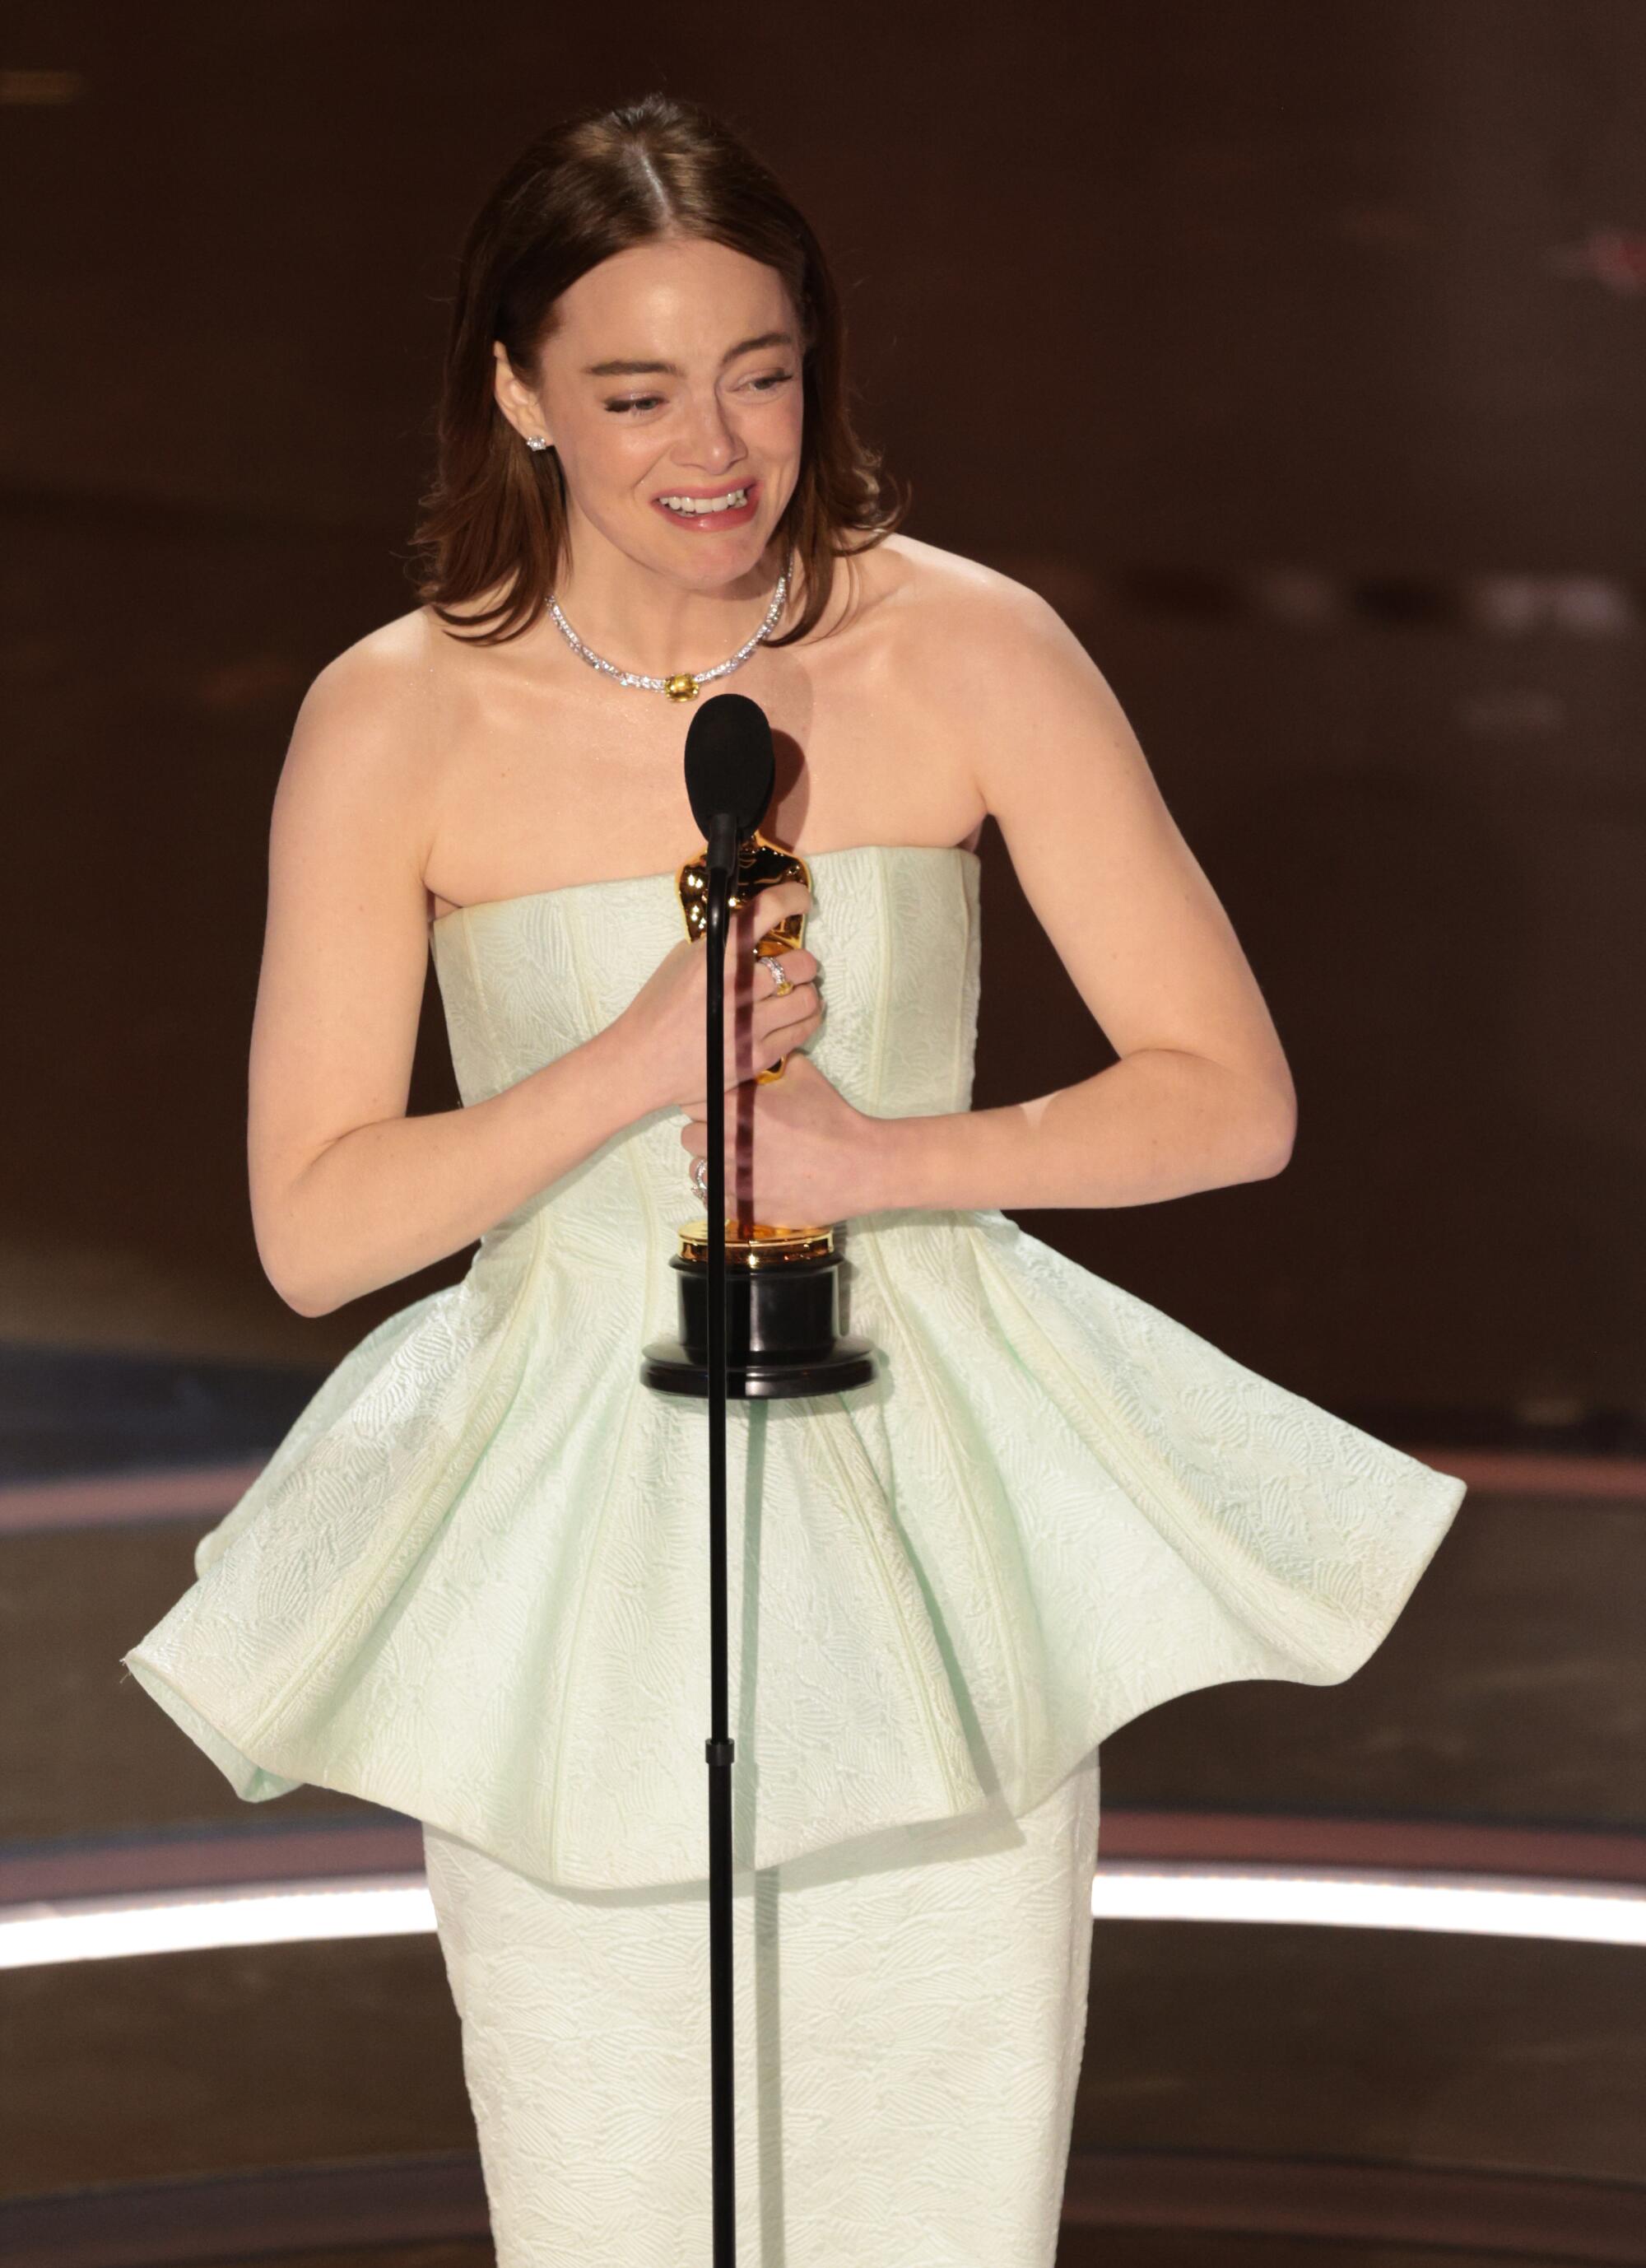 Emma Stone in a white dress clutches an Oscar statuette to her chest.